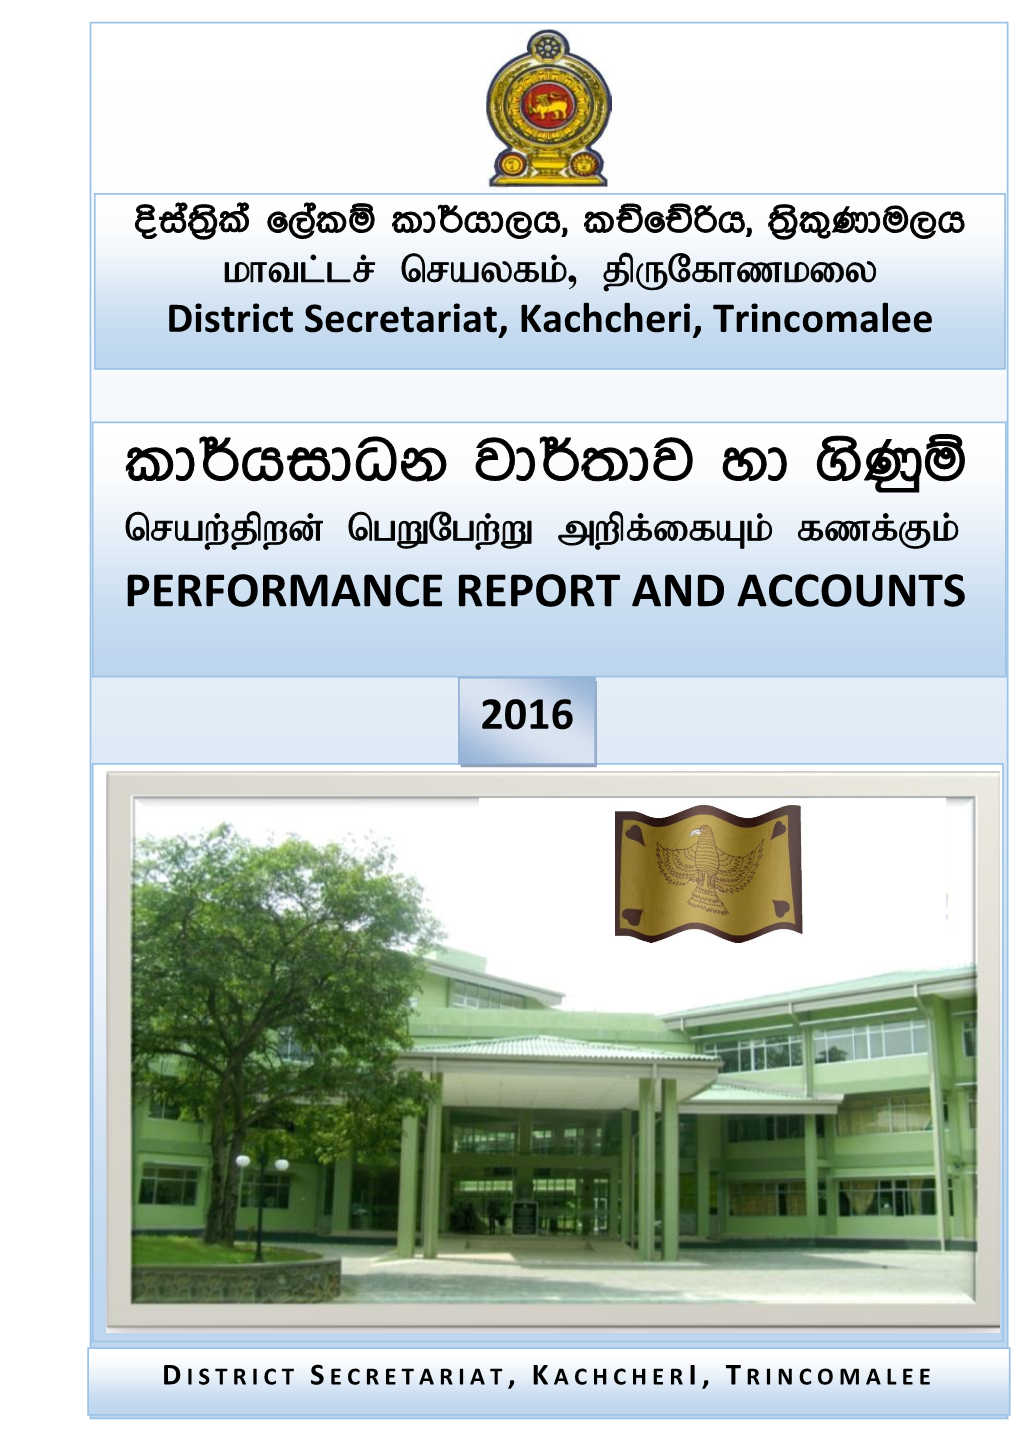 Performance Report and Accounts of Trincomalee District Secretariat For